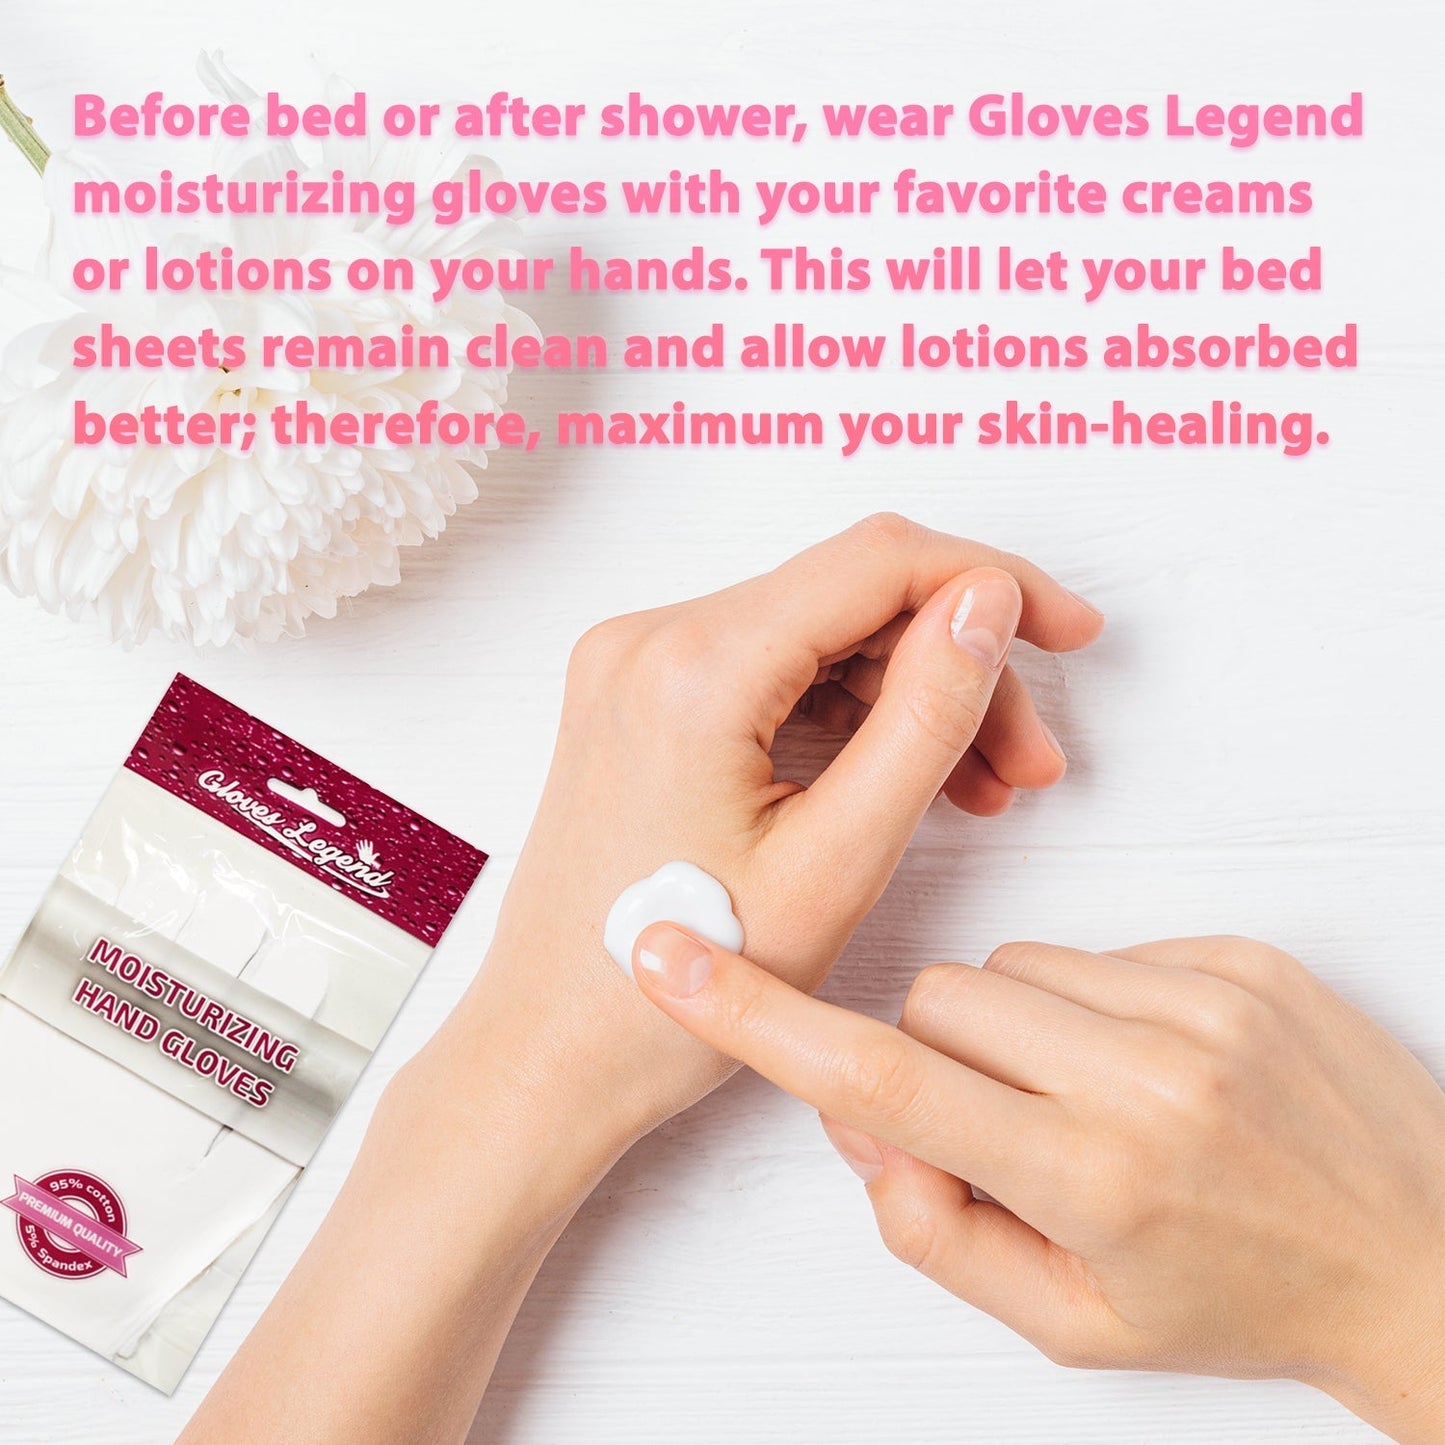 6 Pairs (12 Gloves) - Size Small - Gloves Legend White Cotton Overnight Moisturizing Spa Cosmetic Gloves for Eczema Sensitive Irritated Dry Hands